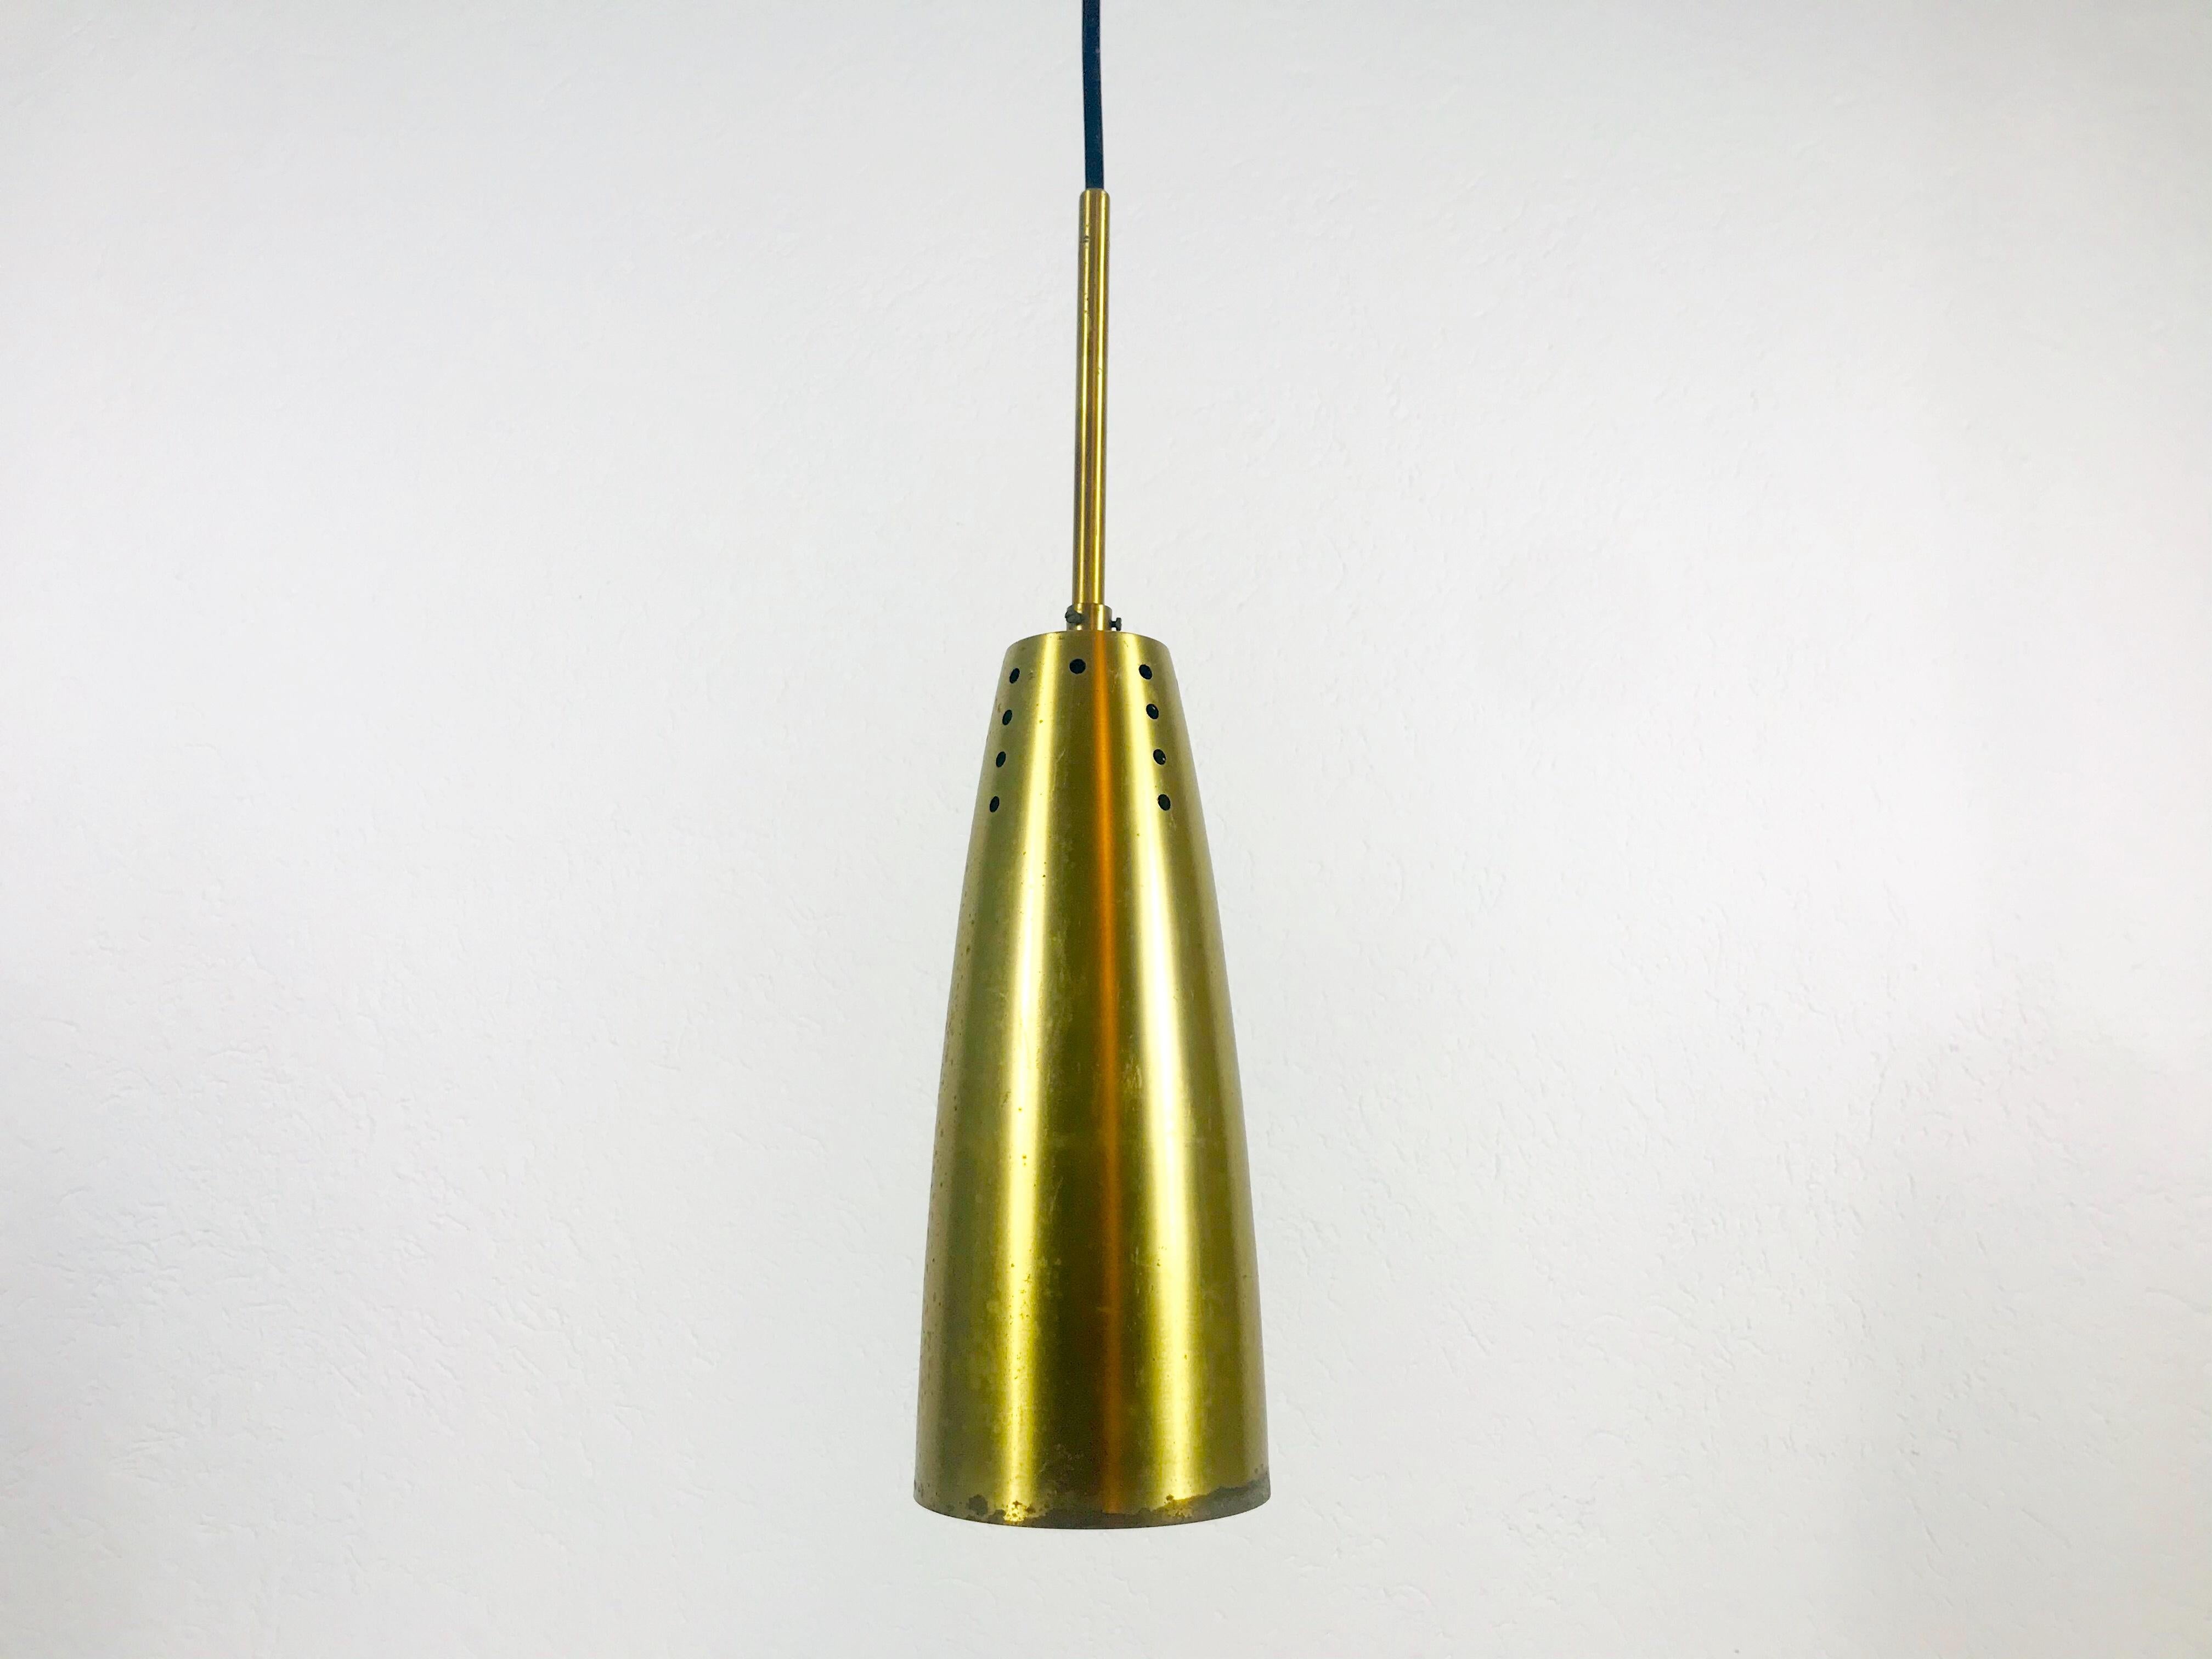 1 of 5 very rare pendant lamps made in Germany in the 1950s. The lighting is made of brass and has the style of the Italian brand Stilnovo. It has many small holes which are creating beautiful light. The lighting requires one E27 light